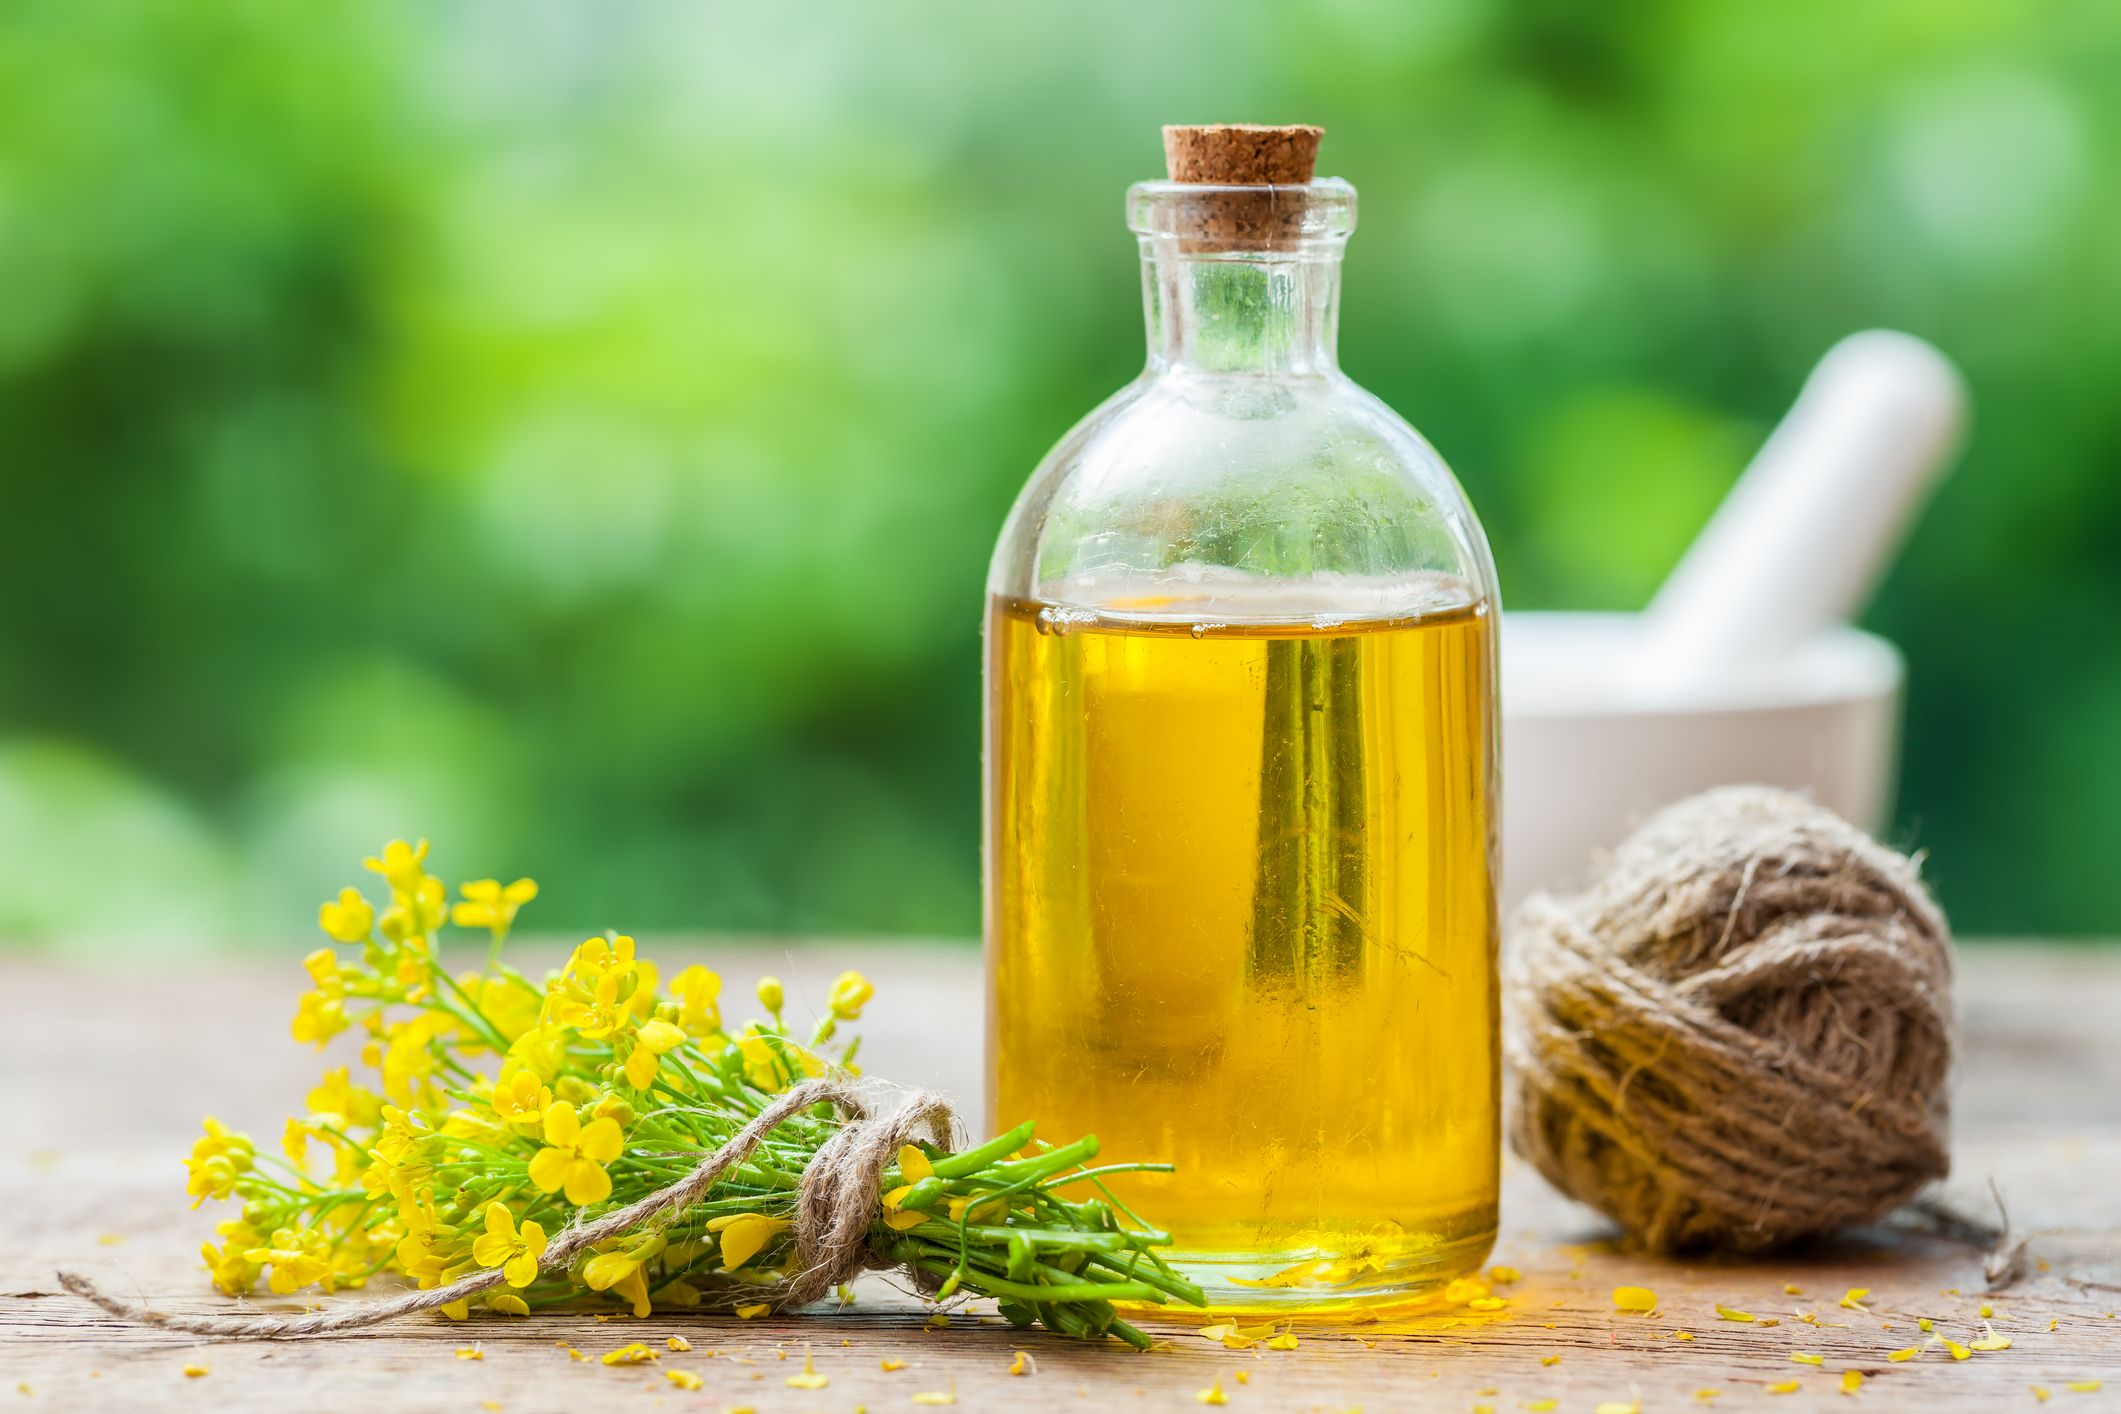 7 Healthy Oils To Cook With, According To Nutritionists